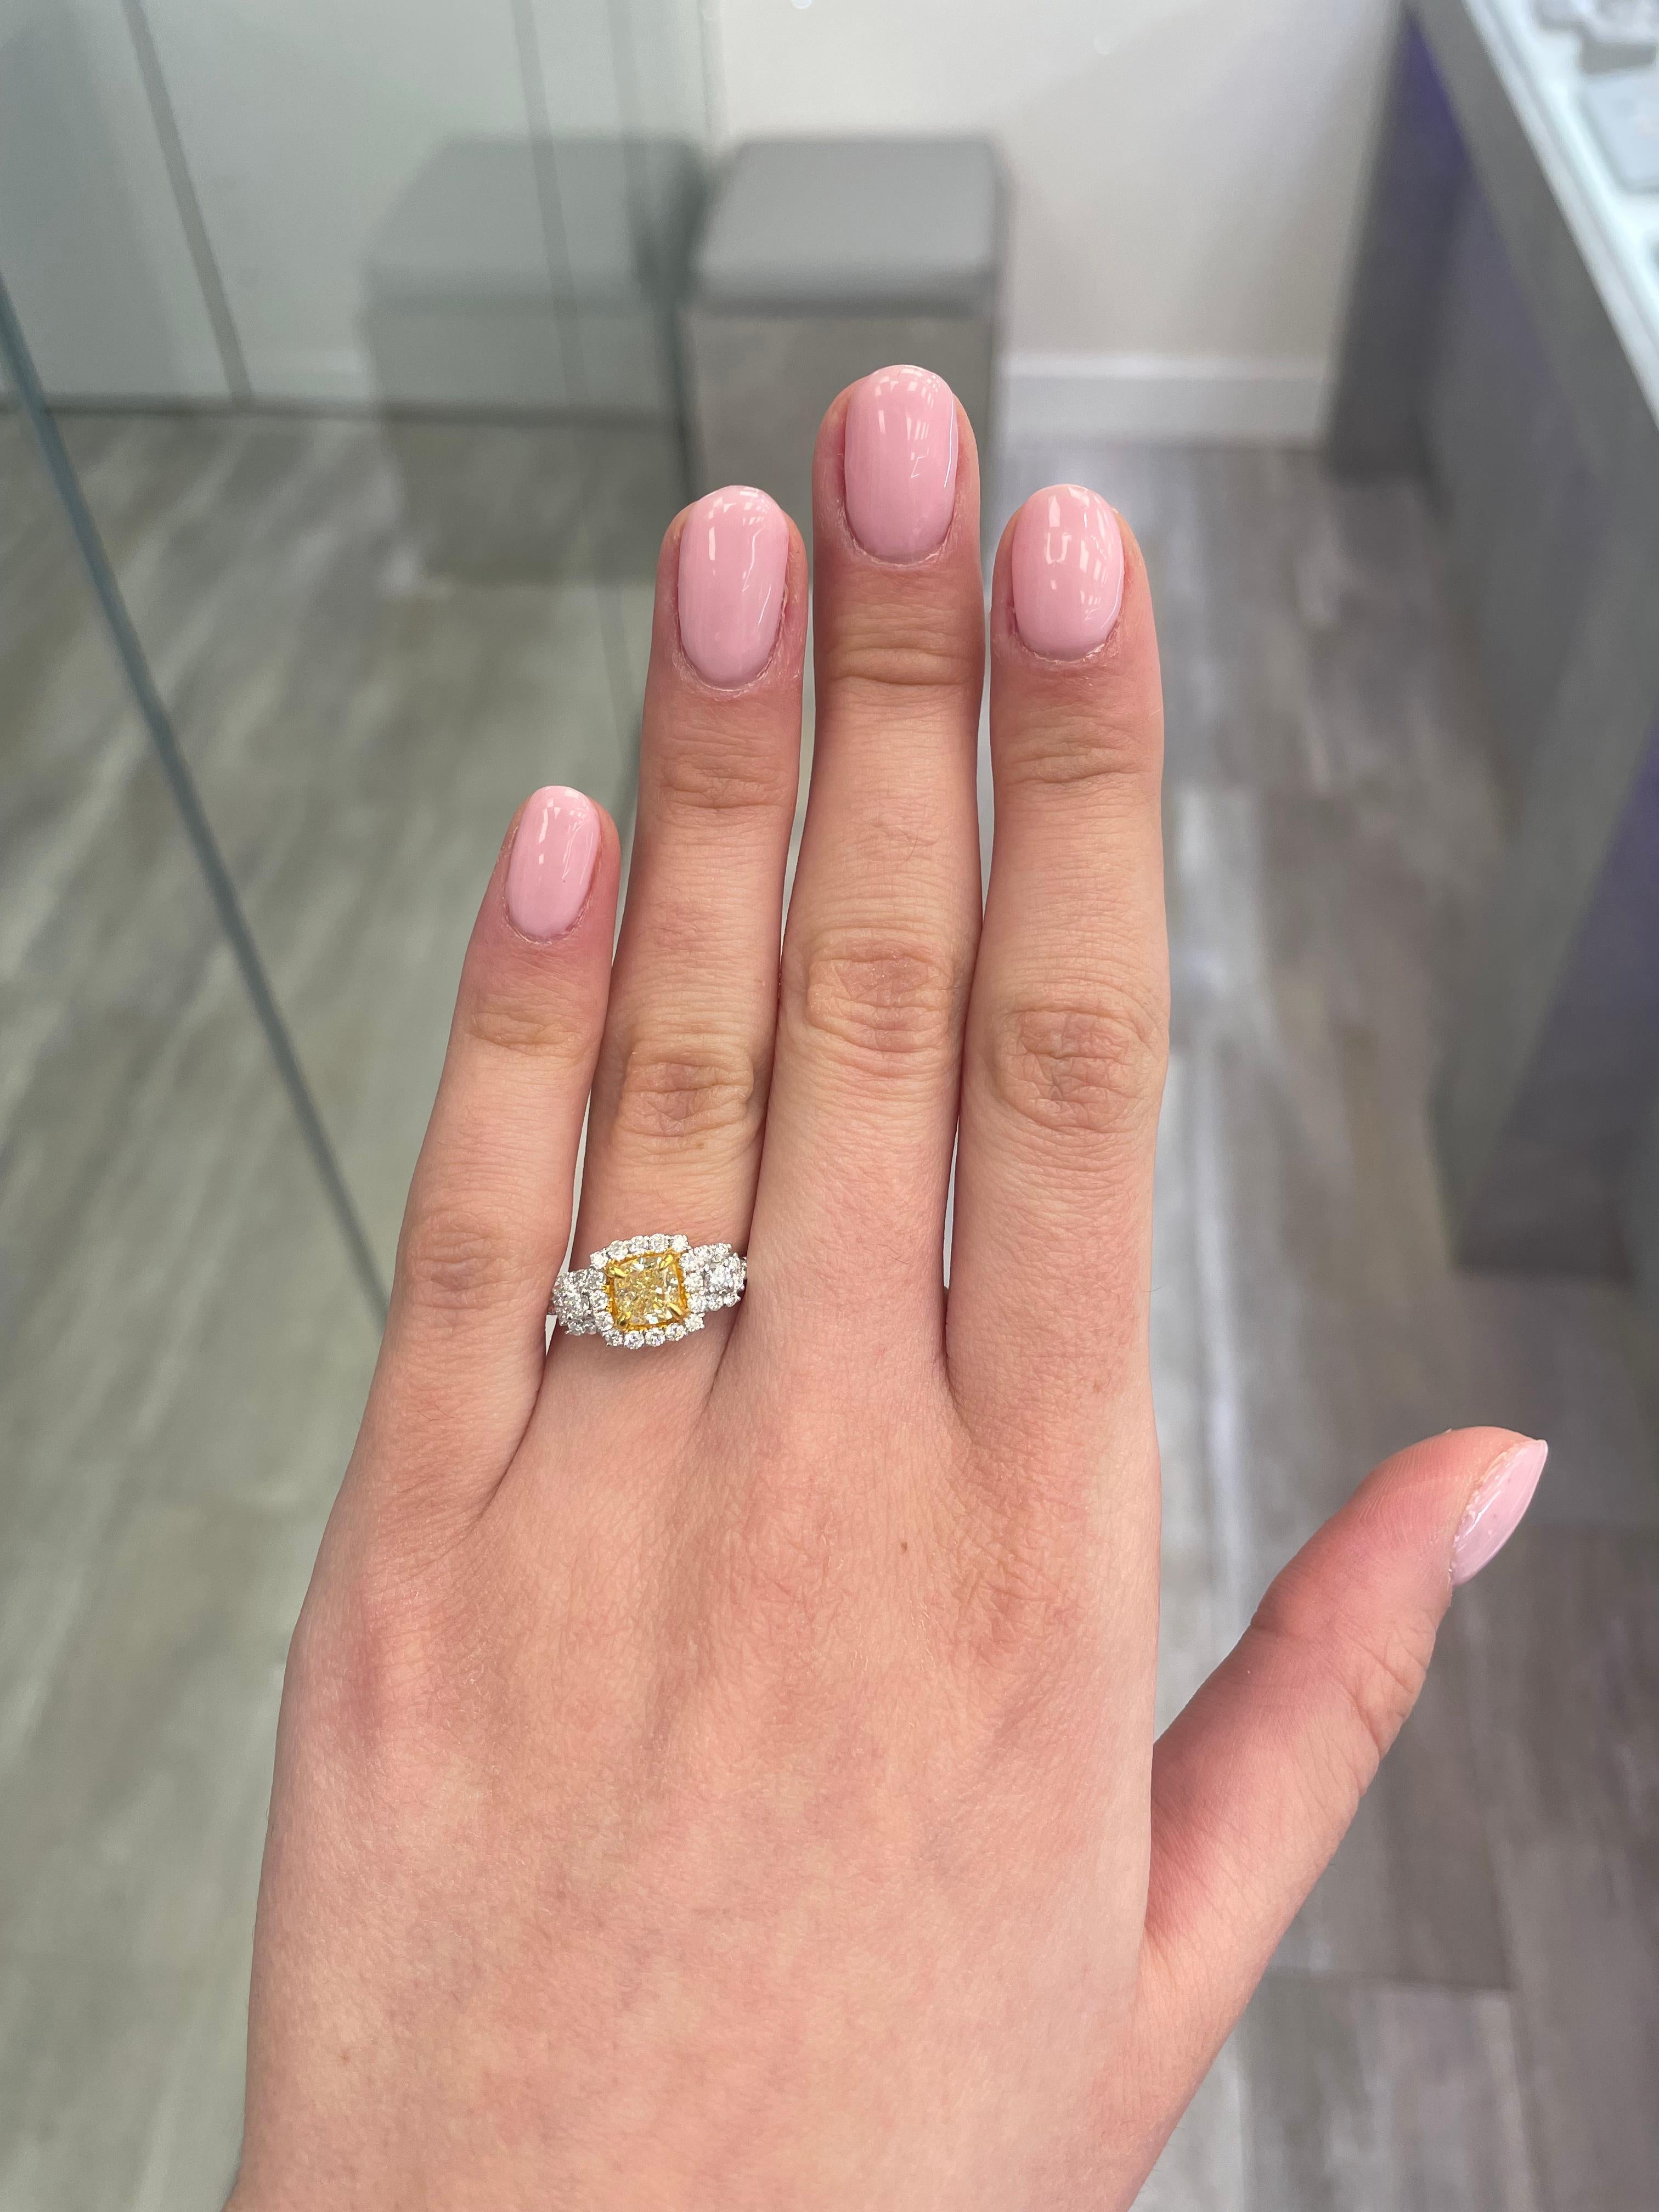 Stunning modern EGL certified fancy yellow diamond three stone halo ring, two-tone 18k yellow and white gold. By Alexander Beverly Hills
1.63 carats total diamond weight.
0.72 carat cushion Fancy Intense Yellow color and VS2 clarity diamond, EGL